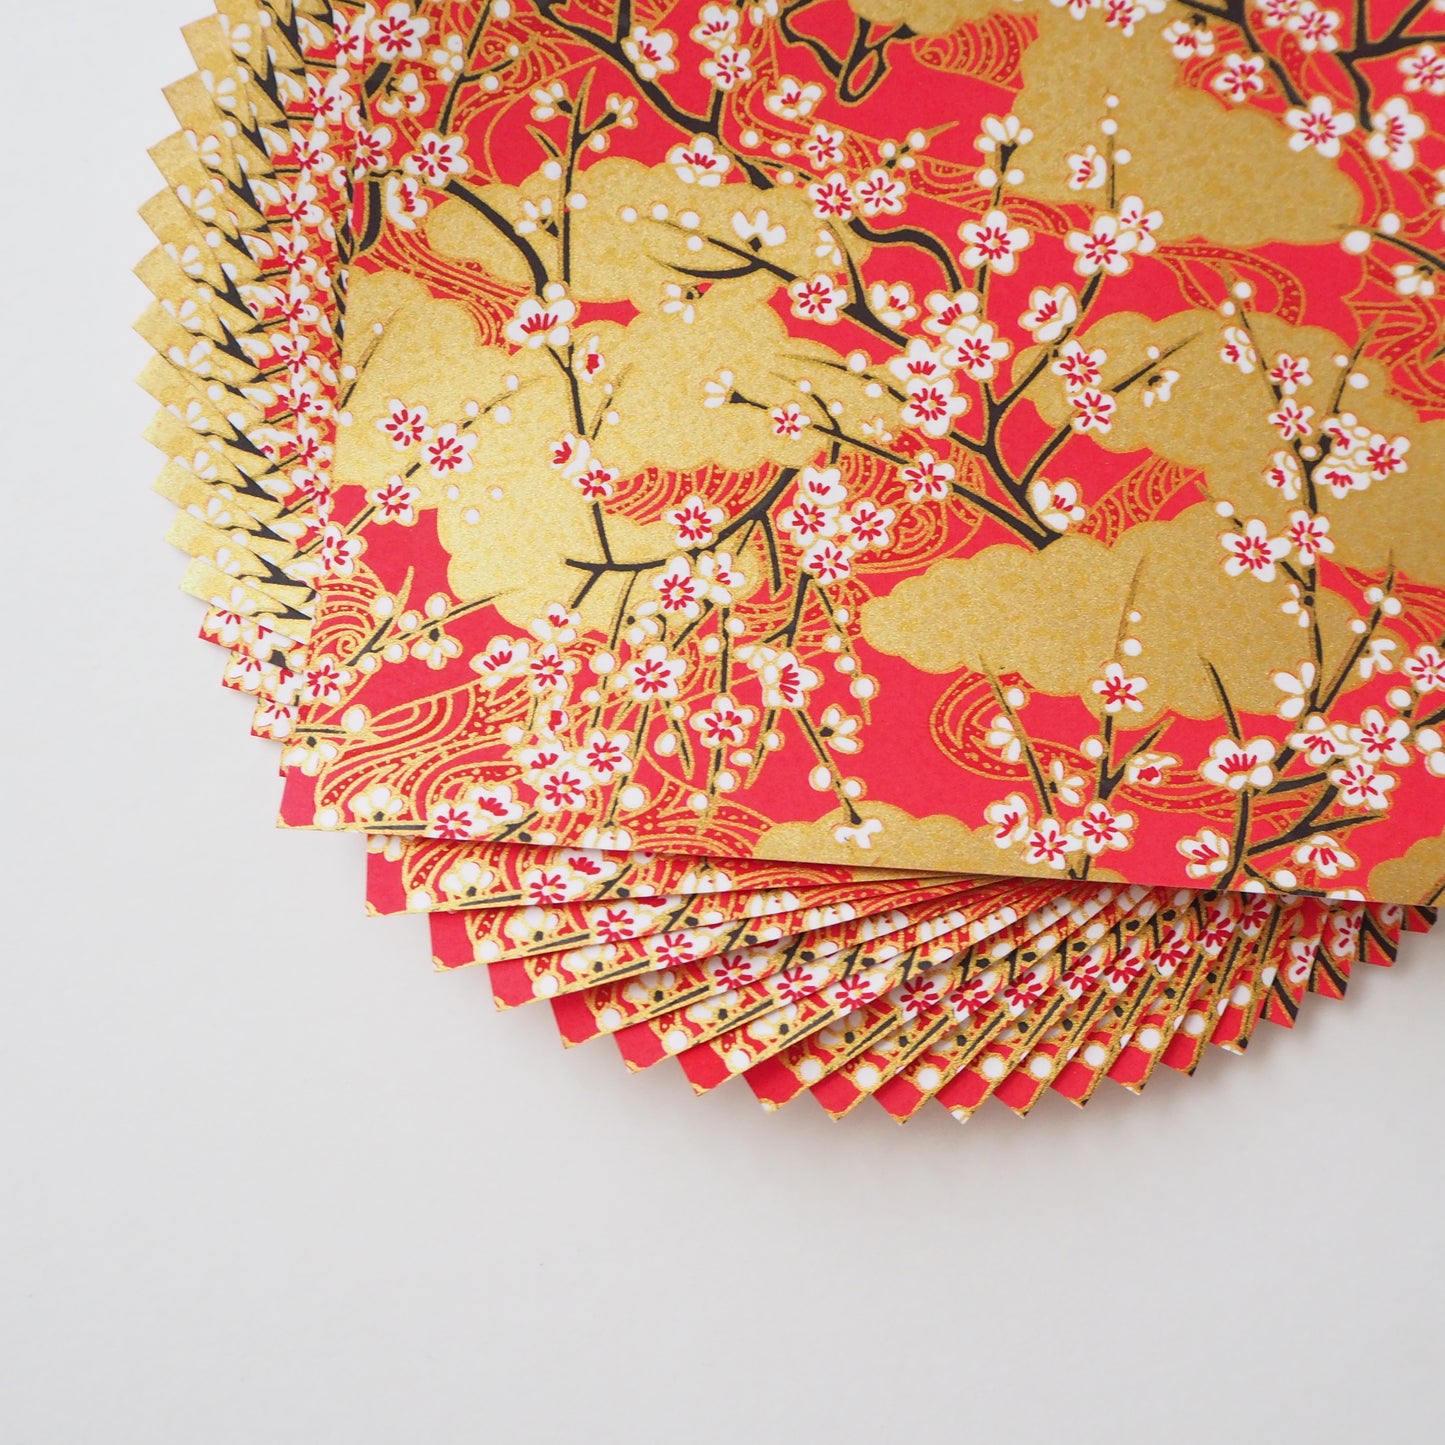 Pack of 20 Sheets 14x14cm Yuzen Washi Origami Paper HZ-383 - Cherry Blossom & Gold Clouds Red